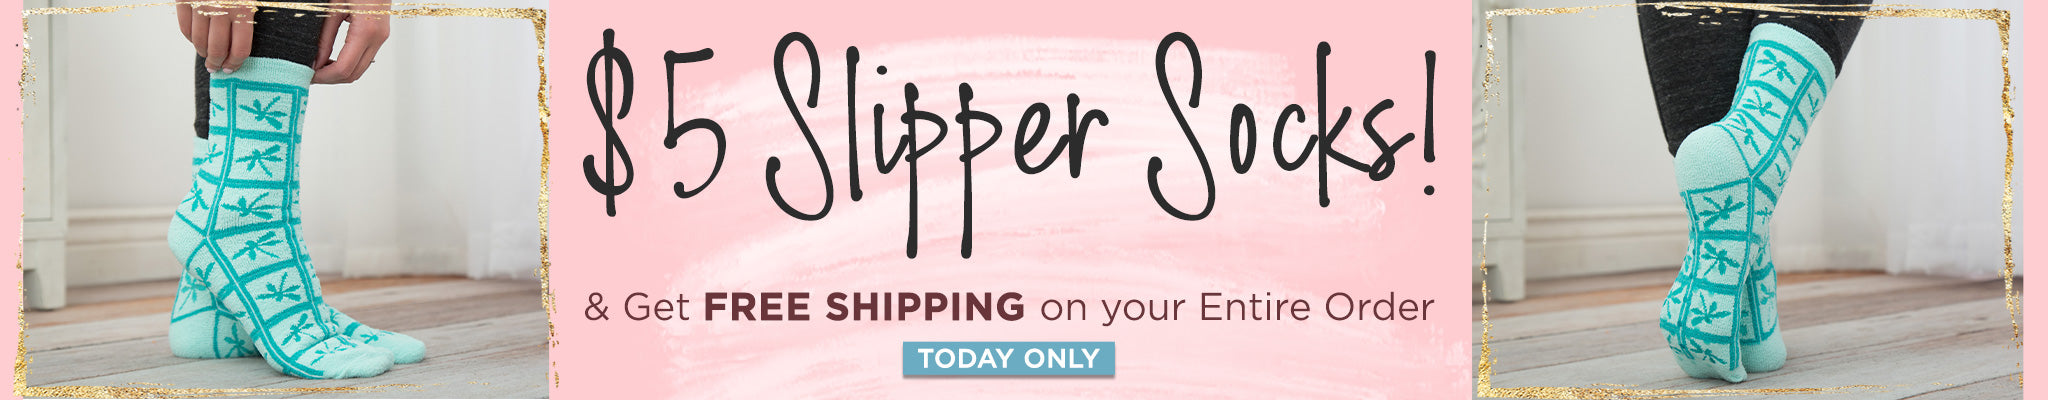  $5 Slipper Socks | Get Free Shipping on Your Entire Order | Today Only!